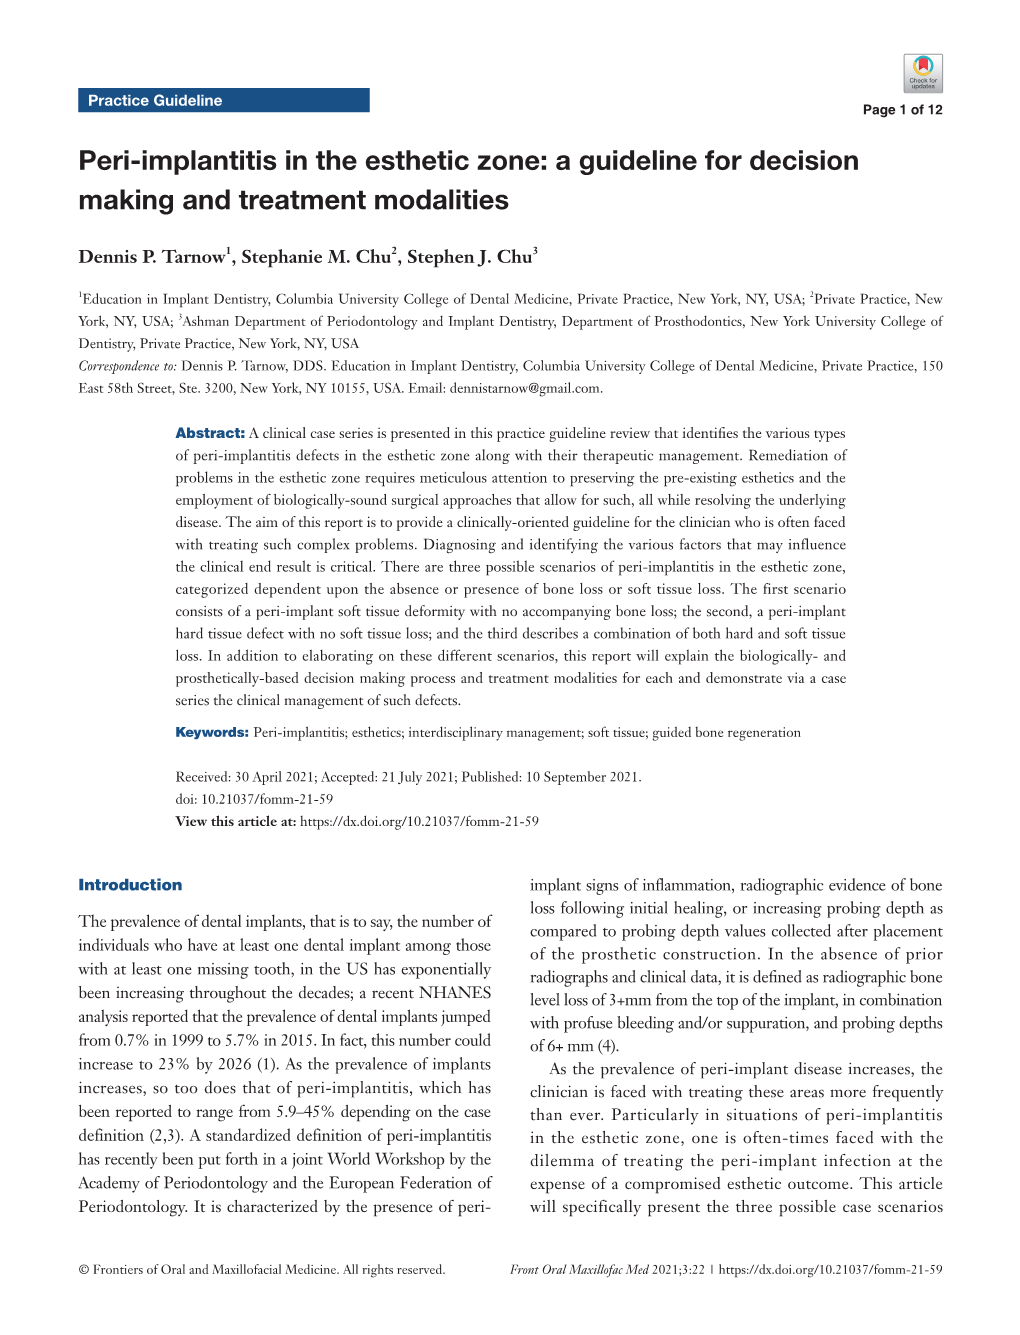 Peri-Implantitis in the Esthetic Zone: a Guideline for Decision Making and Treatment Modalities